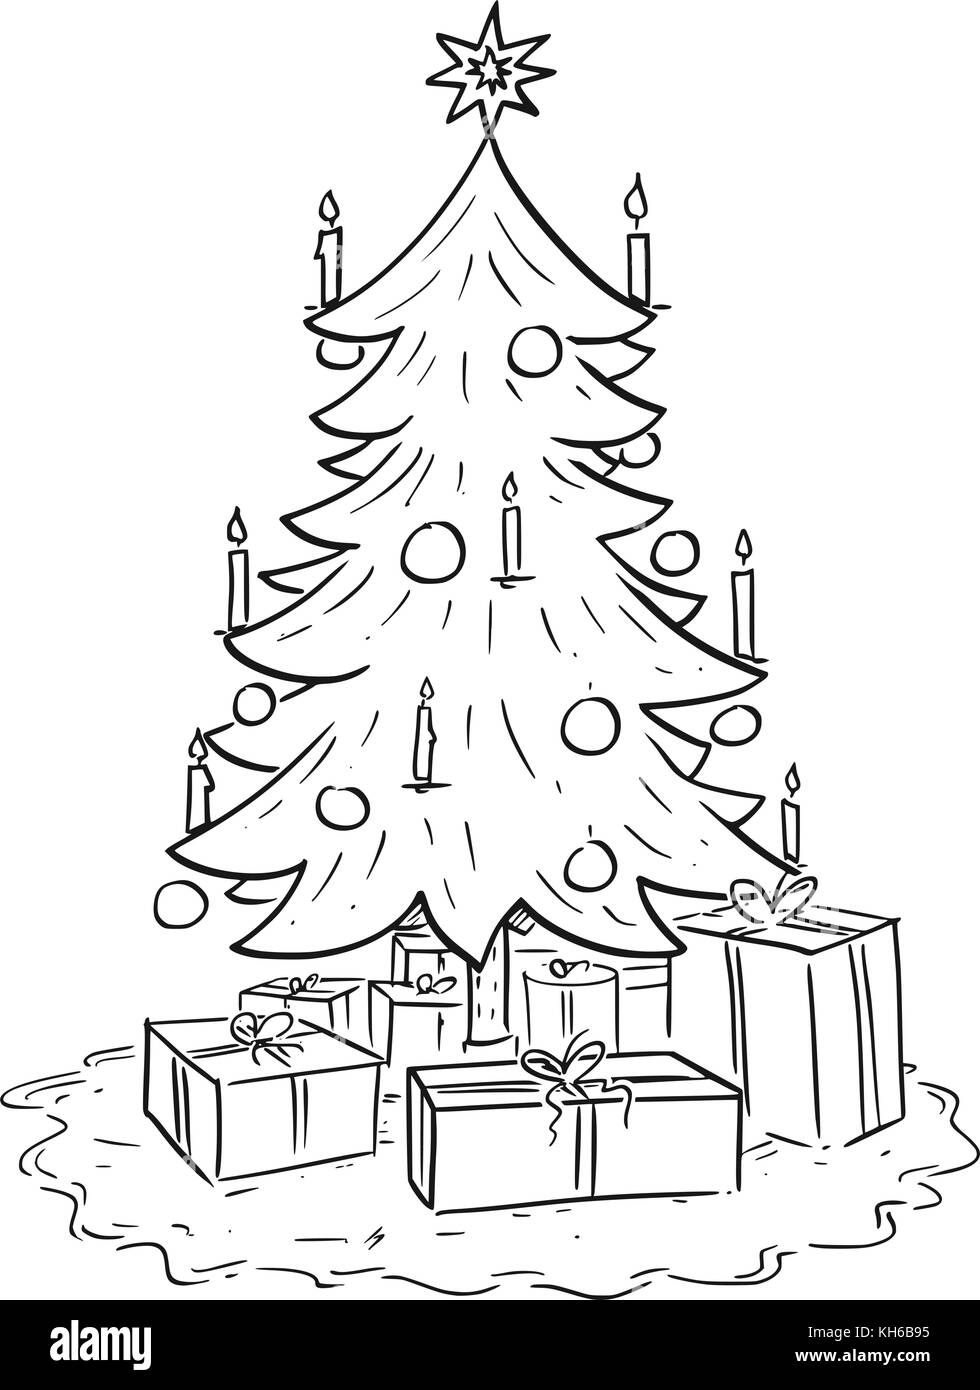 Cartoon drawing illustration of Christmas spruce or fir tree with